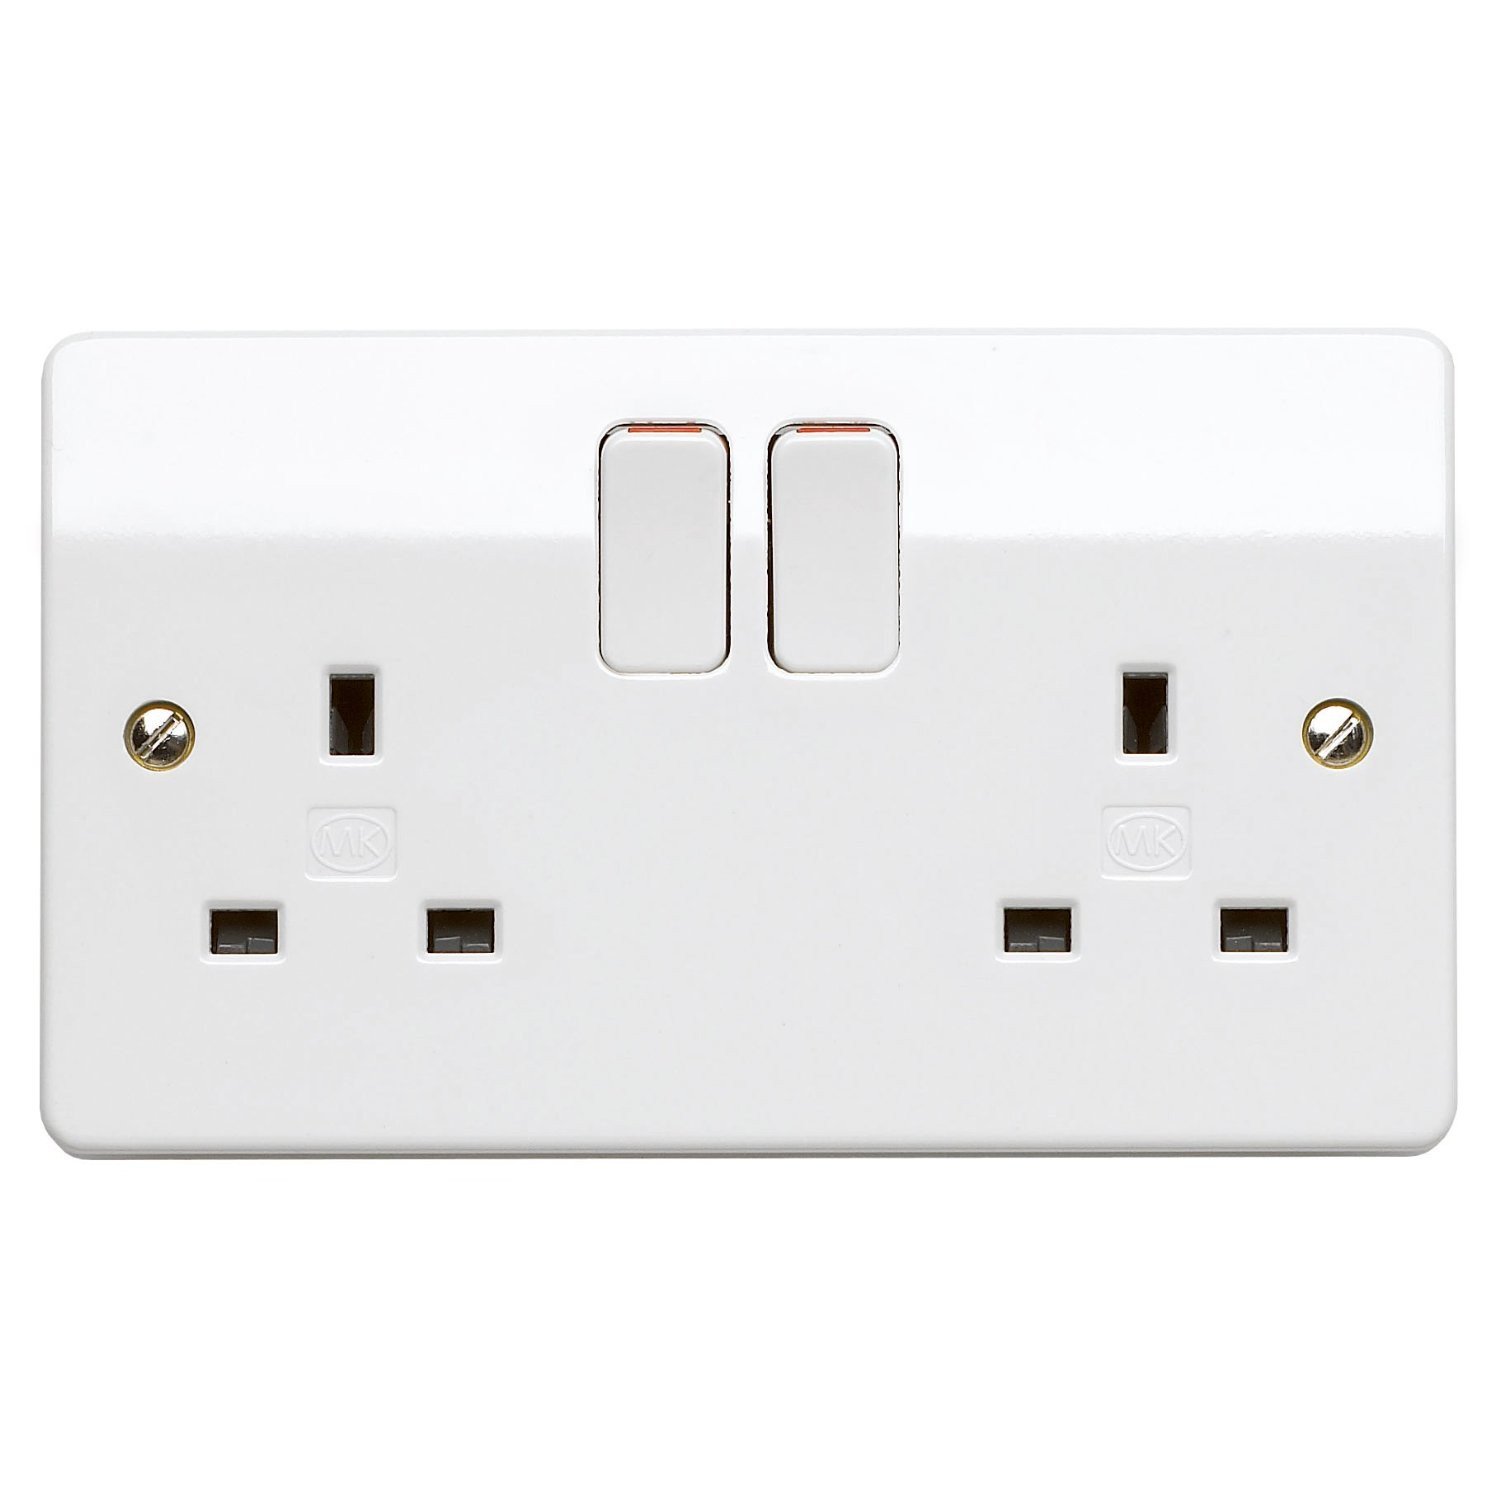 MK Electric K2747WHI Logic Plus 13A 2 Gang DP Switched Socket Outlet ...